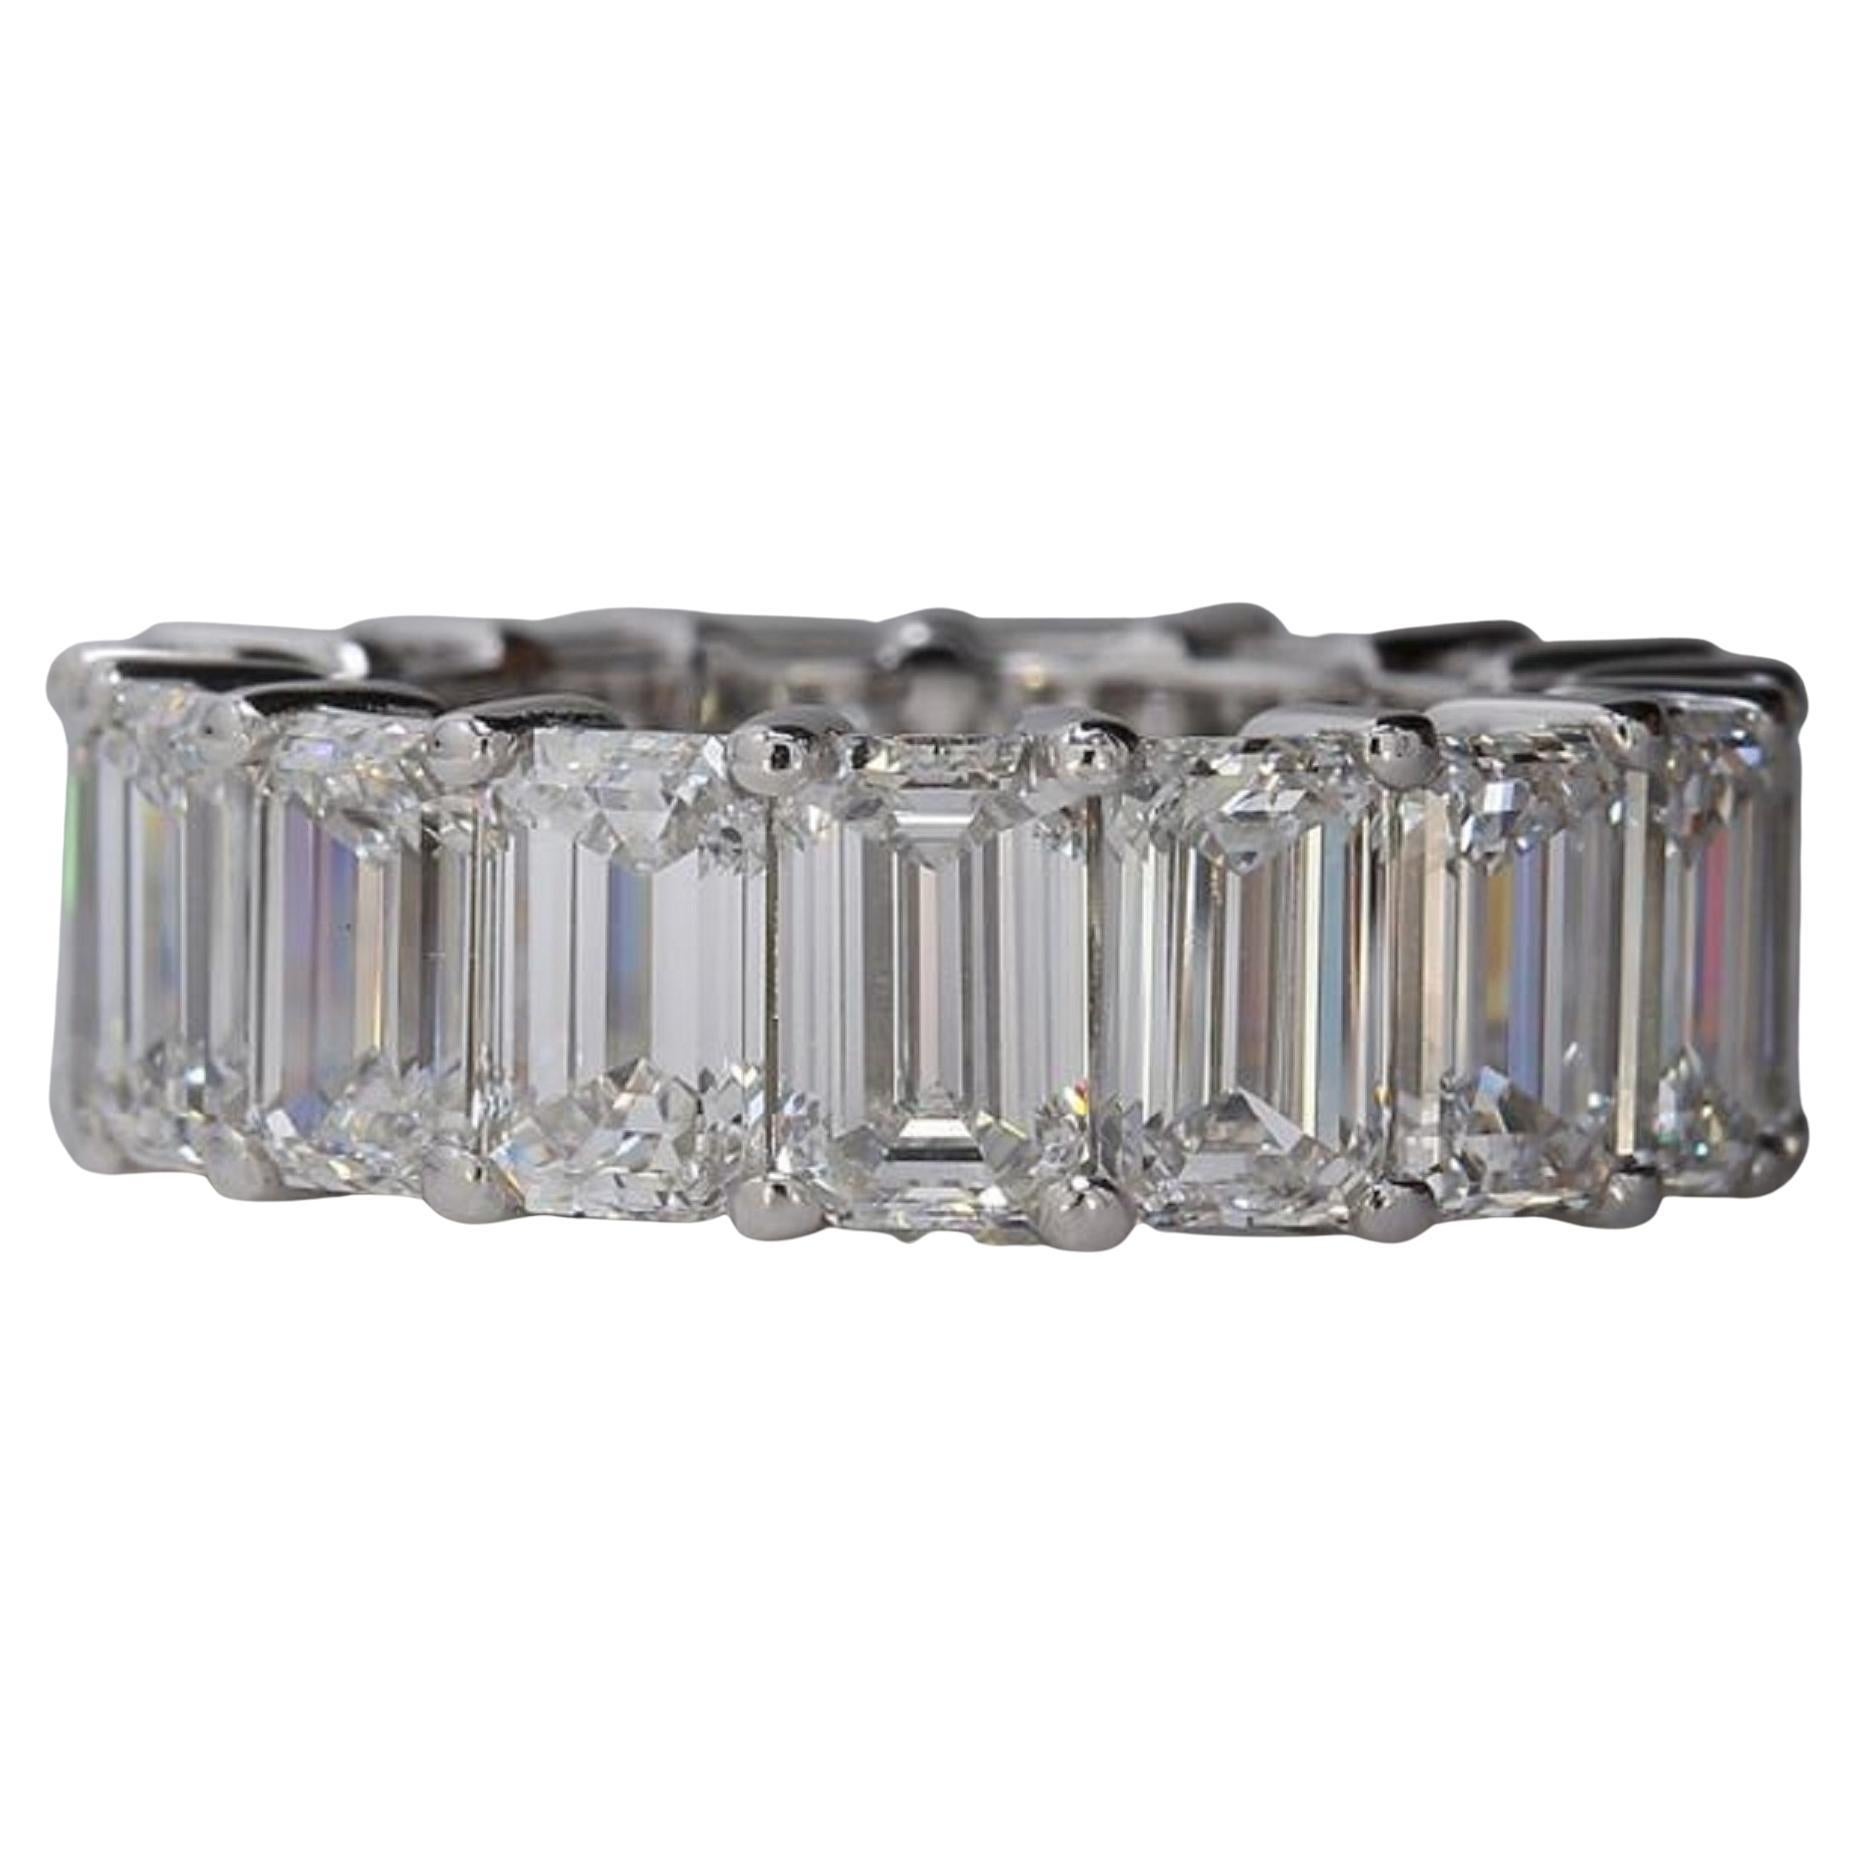 Eternity band in platinum with eagle claw basket set GIA certified F-G/VVS1-VS2 (15) emerald cut diamonds. D15.38ct.t.w. Size 6.5